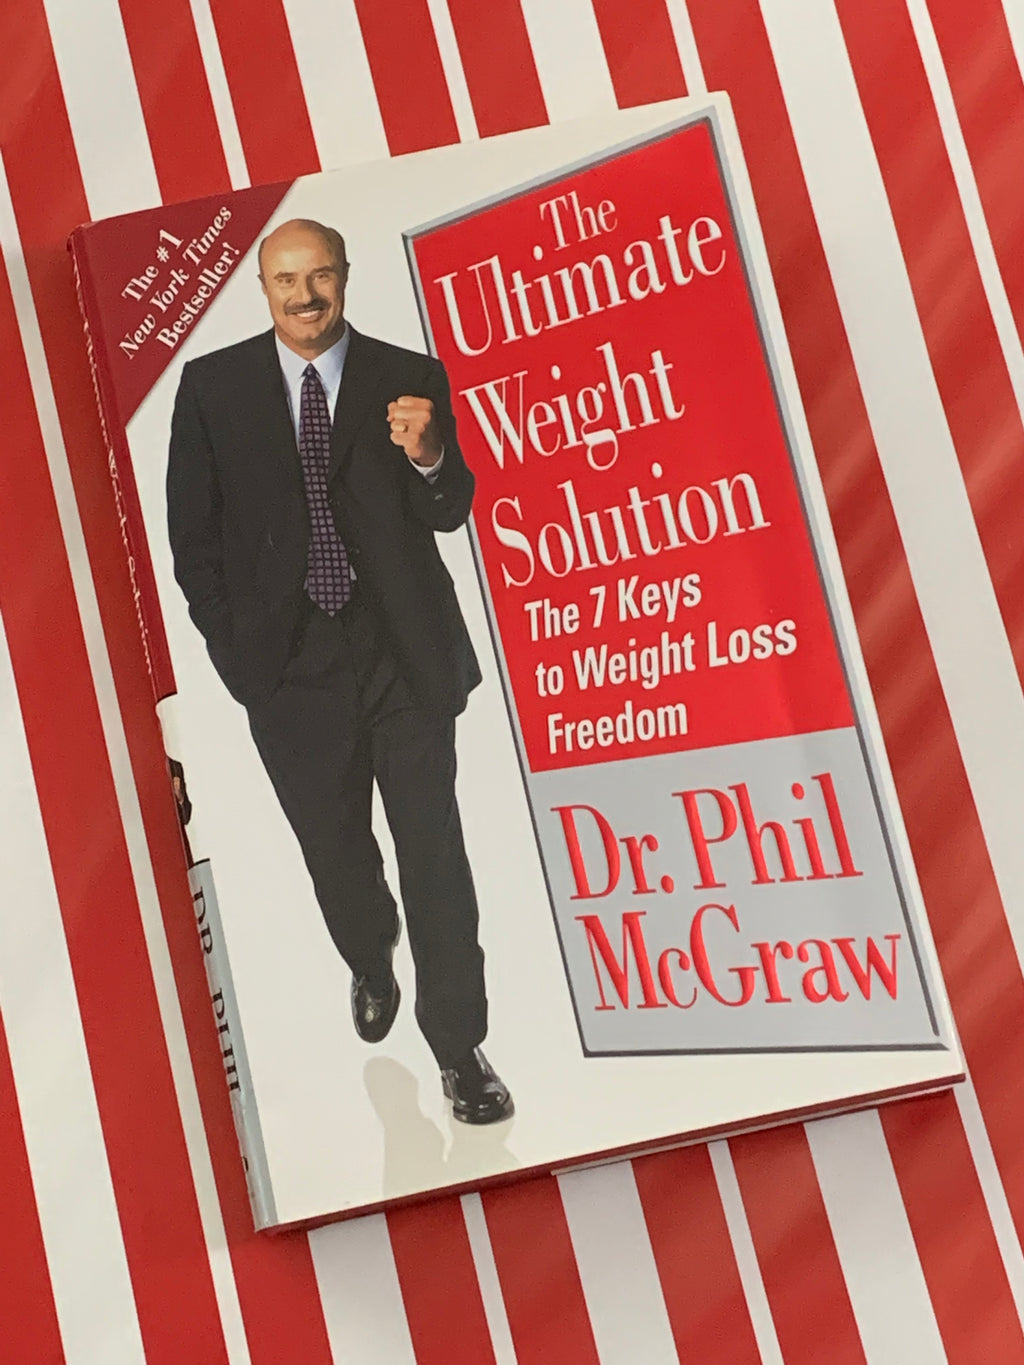 The Ultimate Weight Solution: The 7 Keys to Weight Loss Freedom- By Dr. Phil McGraw